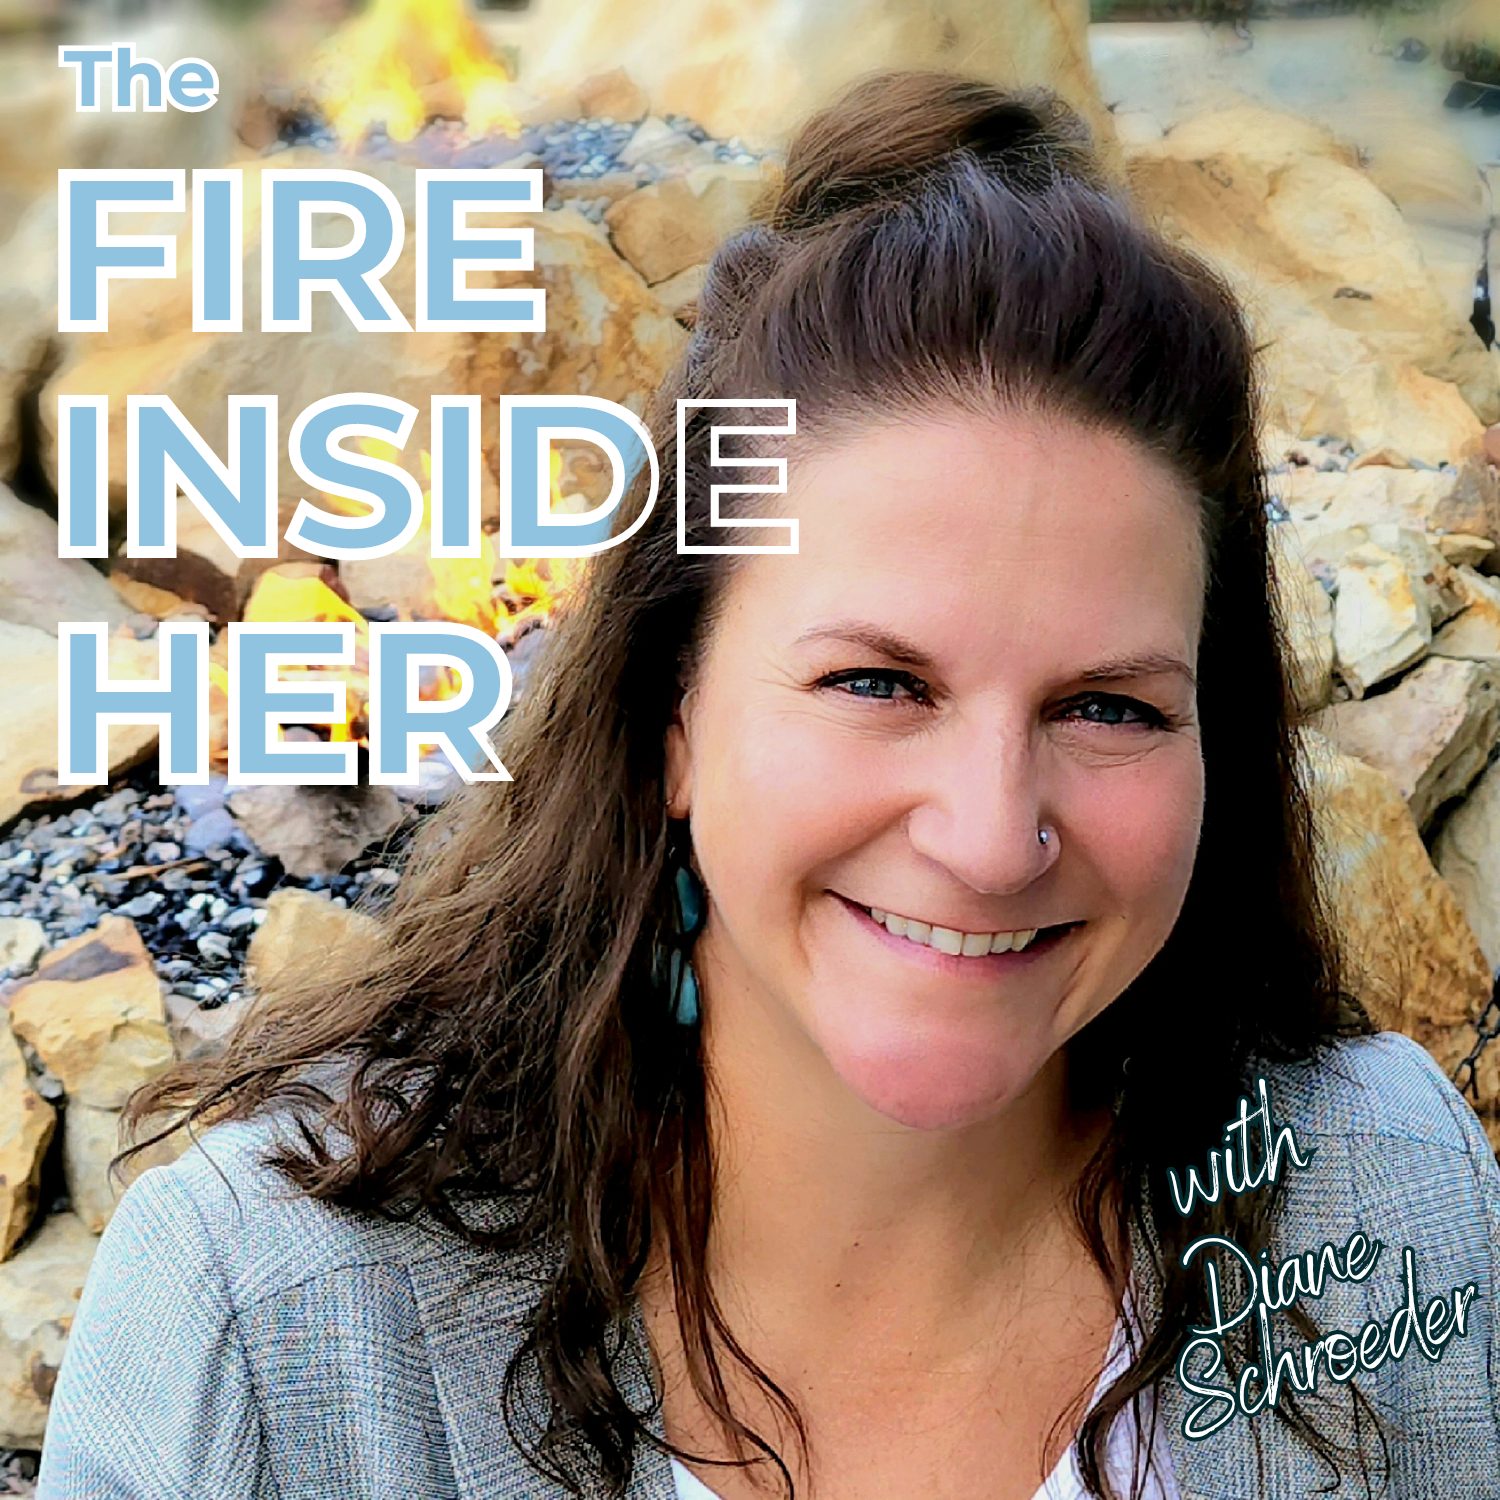 The Fire Inside Her with Diane Schroeder's artwork